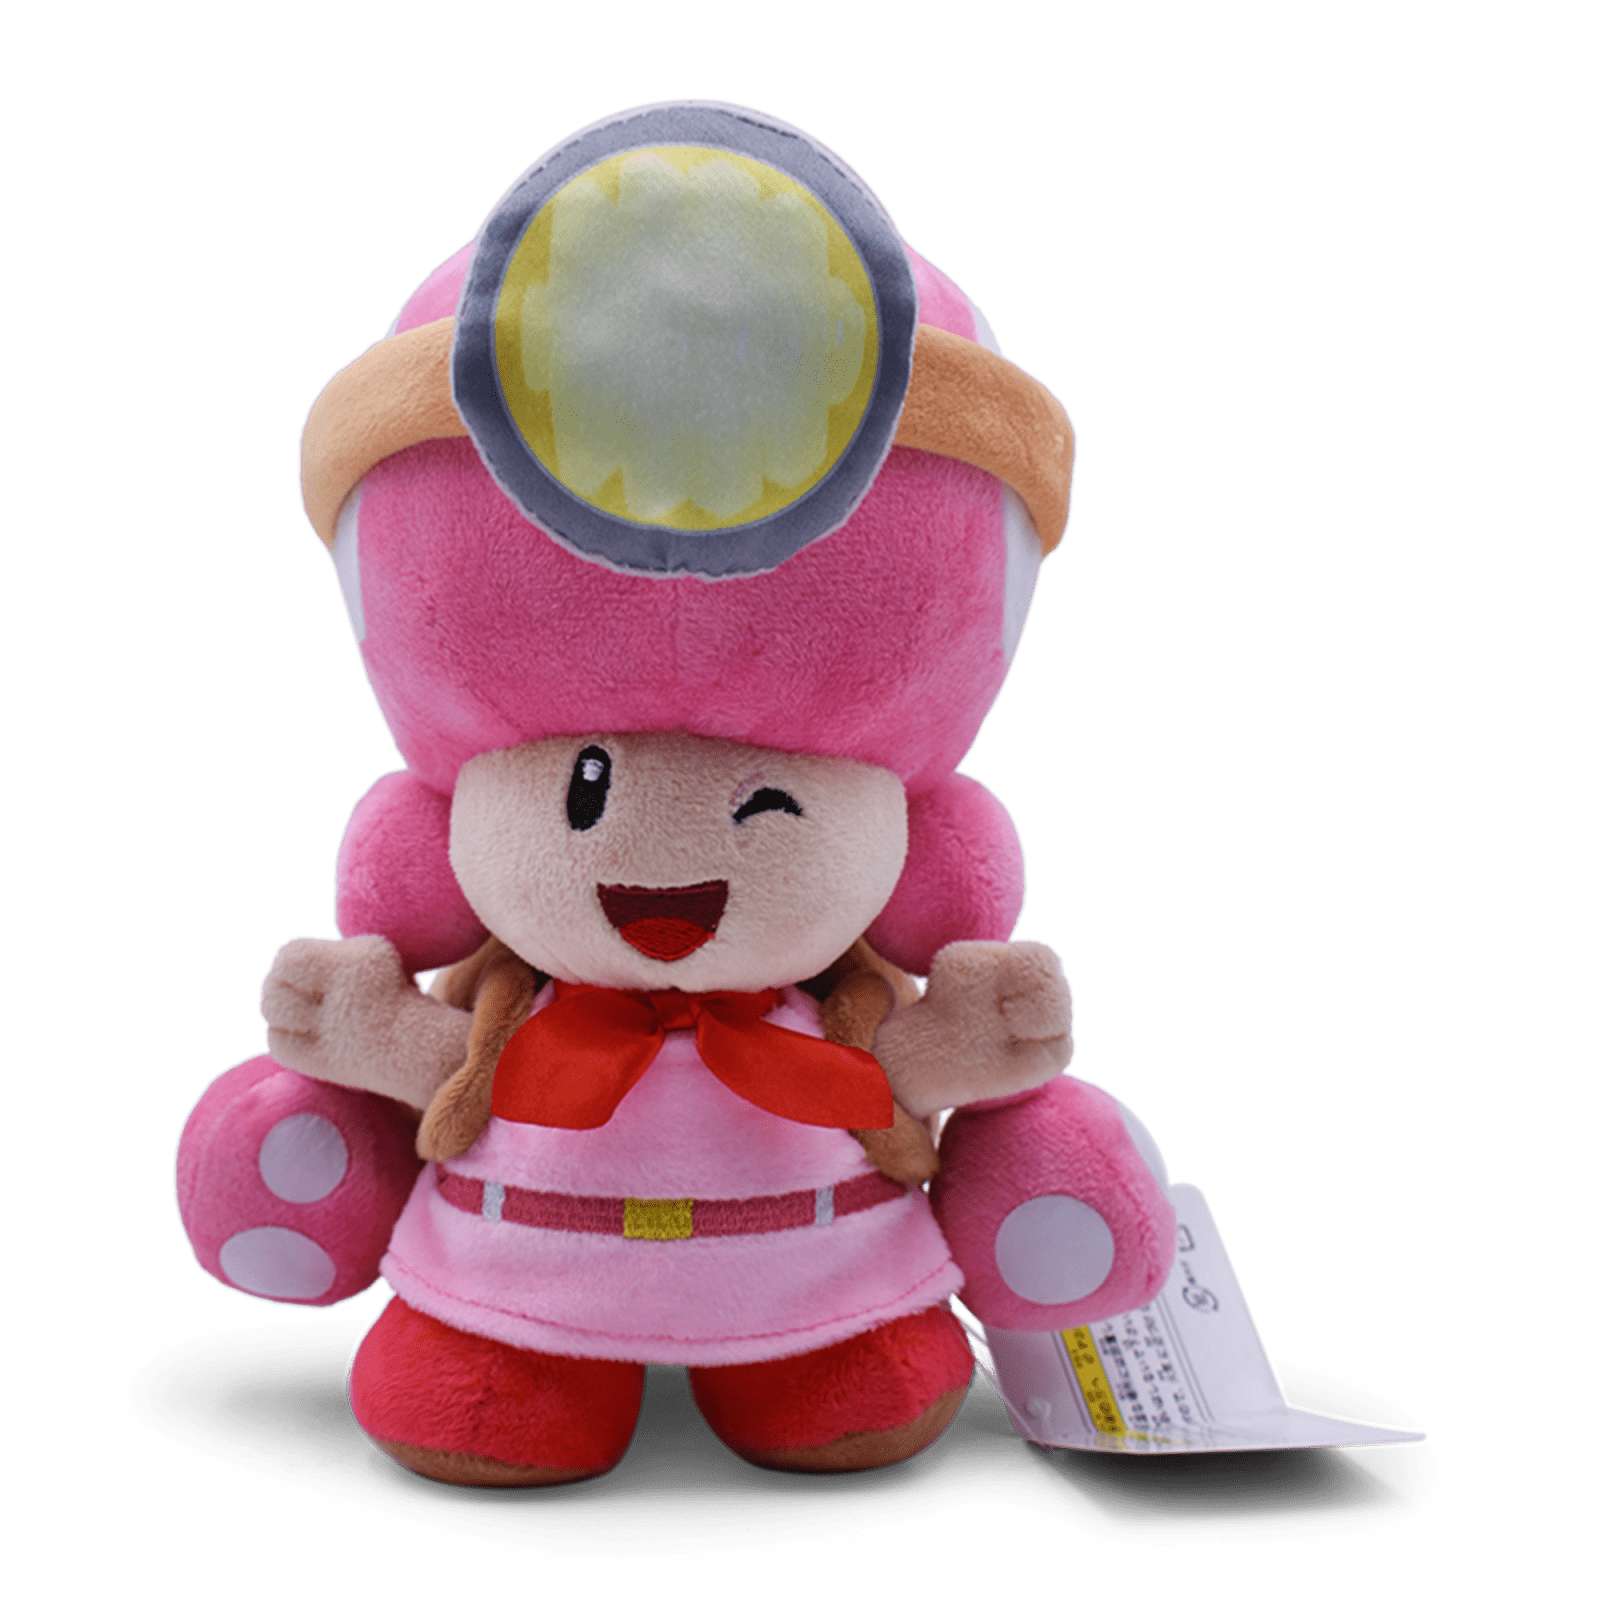 Toadsworth Toadette Toad Little Buddy Plush Stuffed Toy 2PCS Super Mario Bros 